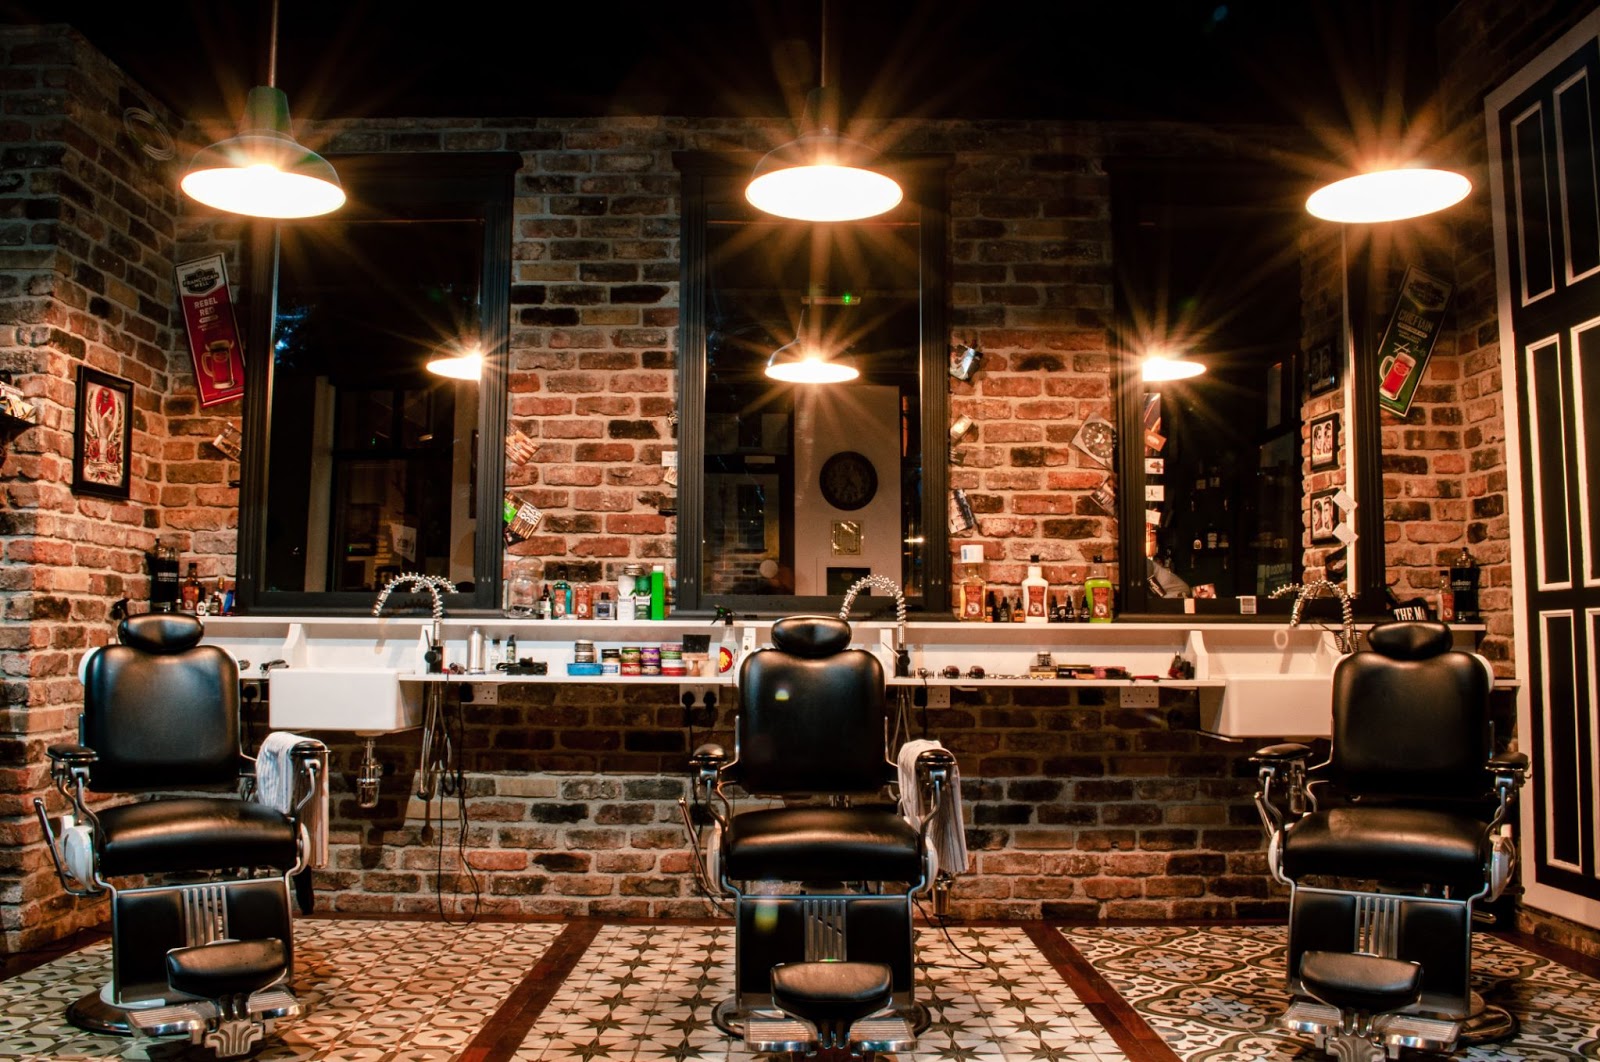 The Best Marketing Ideas for a Barber Shop - Shortcuts UK